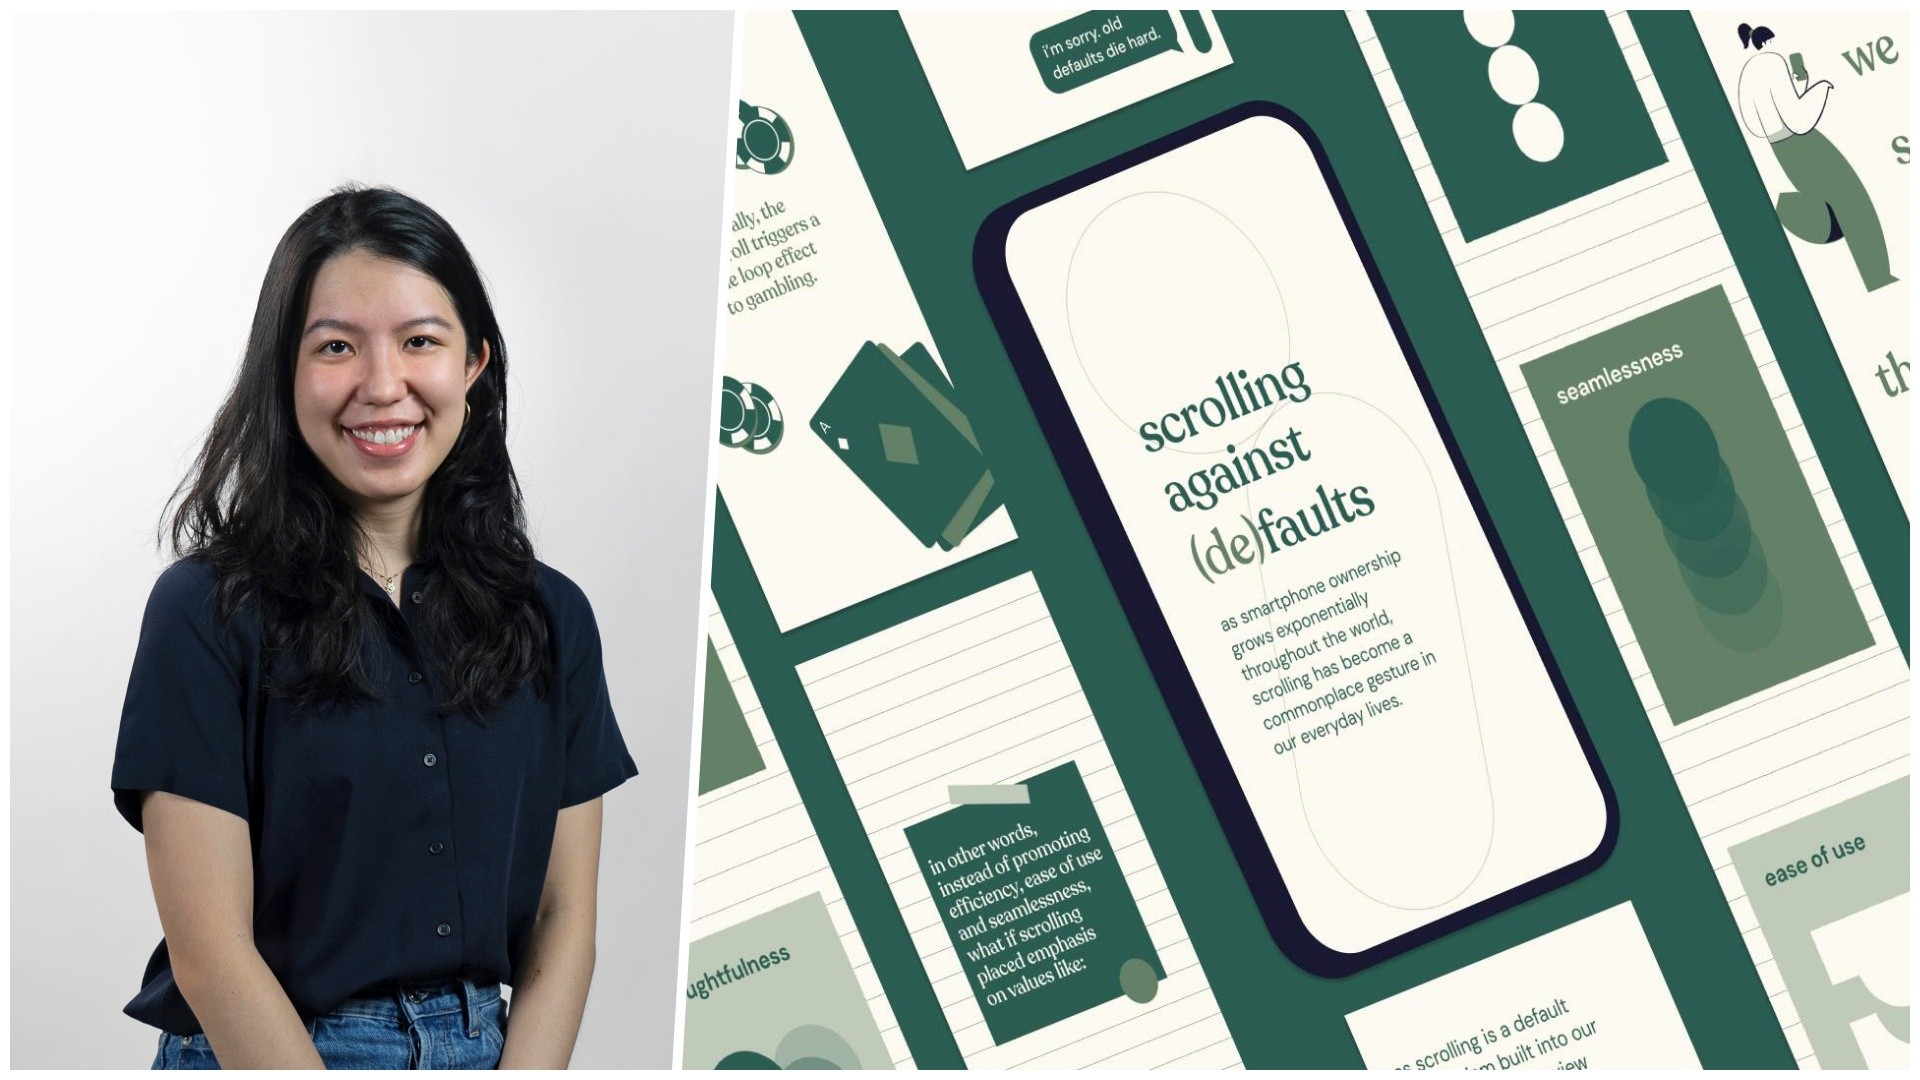 Scrolling Against (De)faults is Carina Lim’s attempt to probe conventional design.